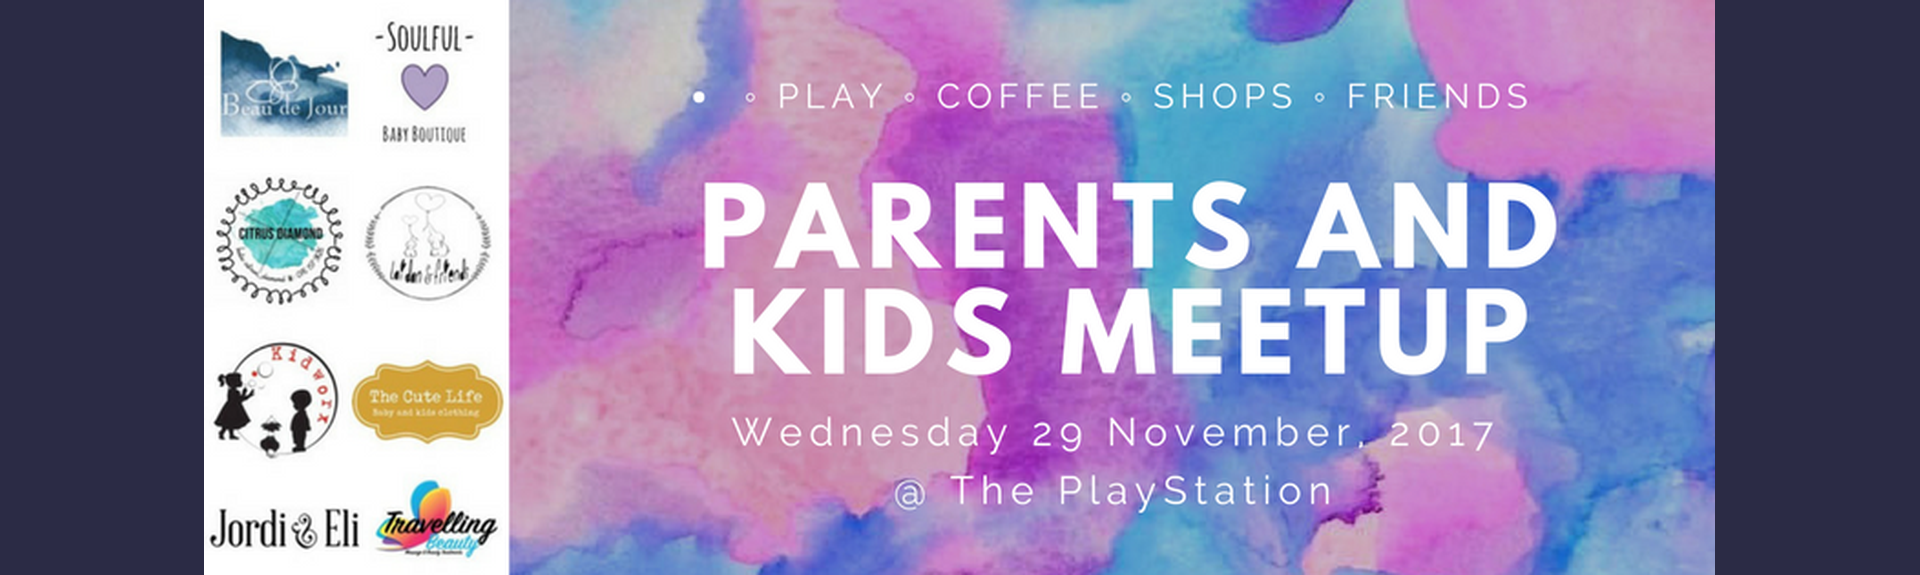 Parents and Kids Meet Up at The PlayStation